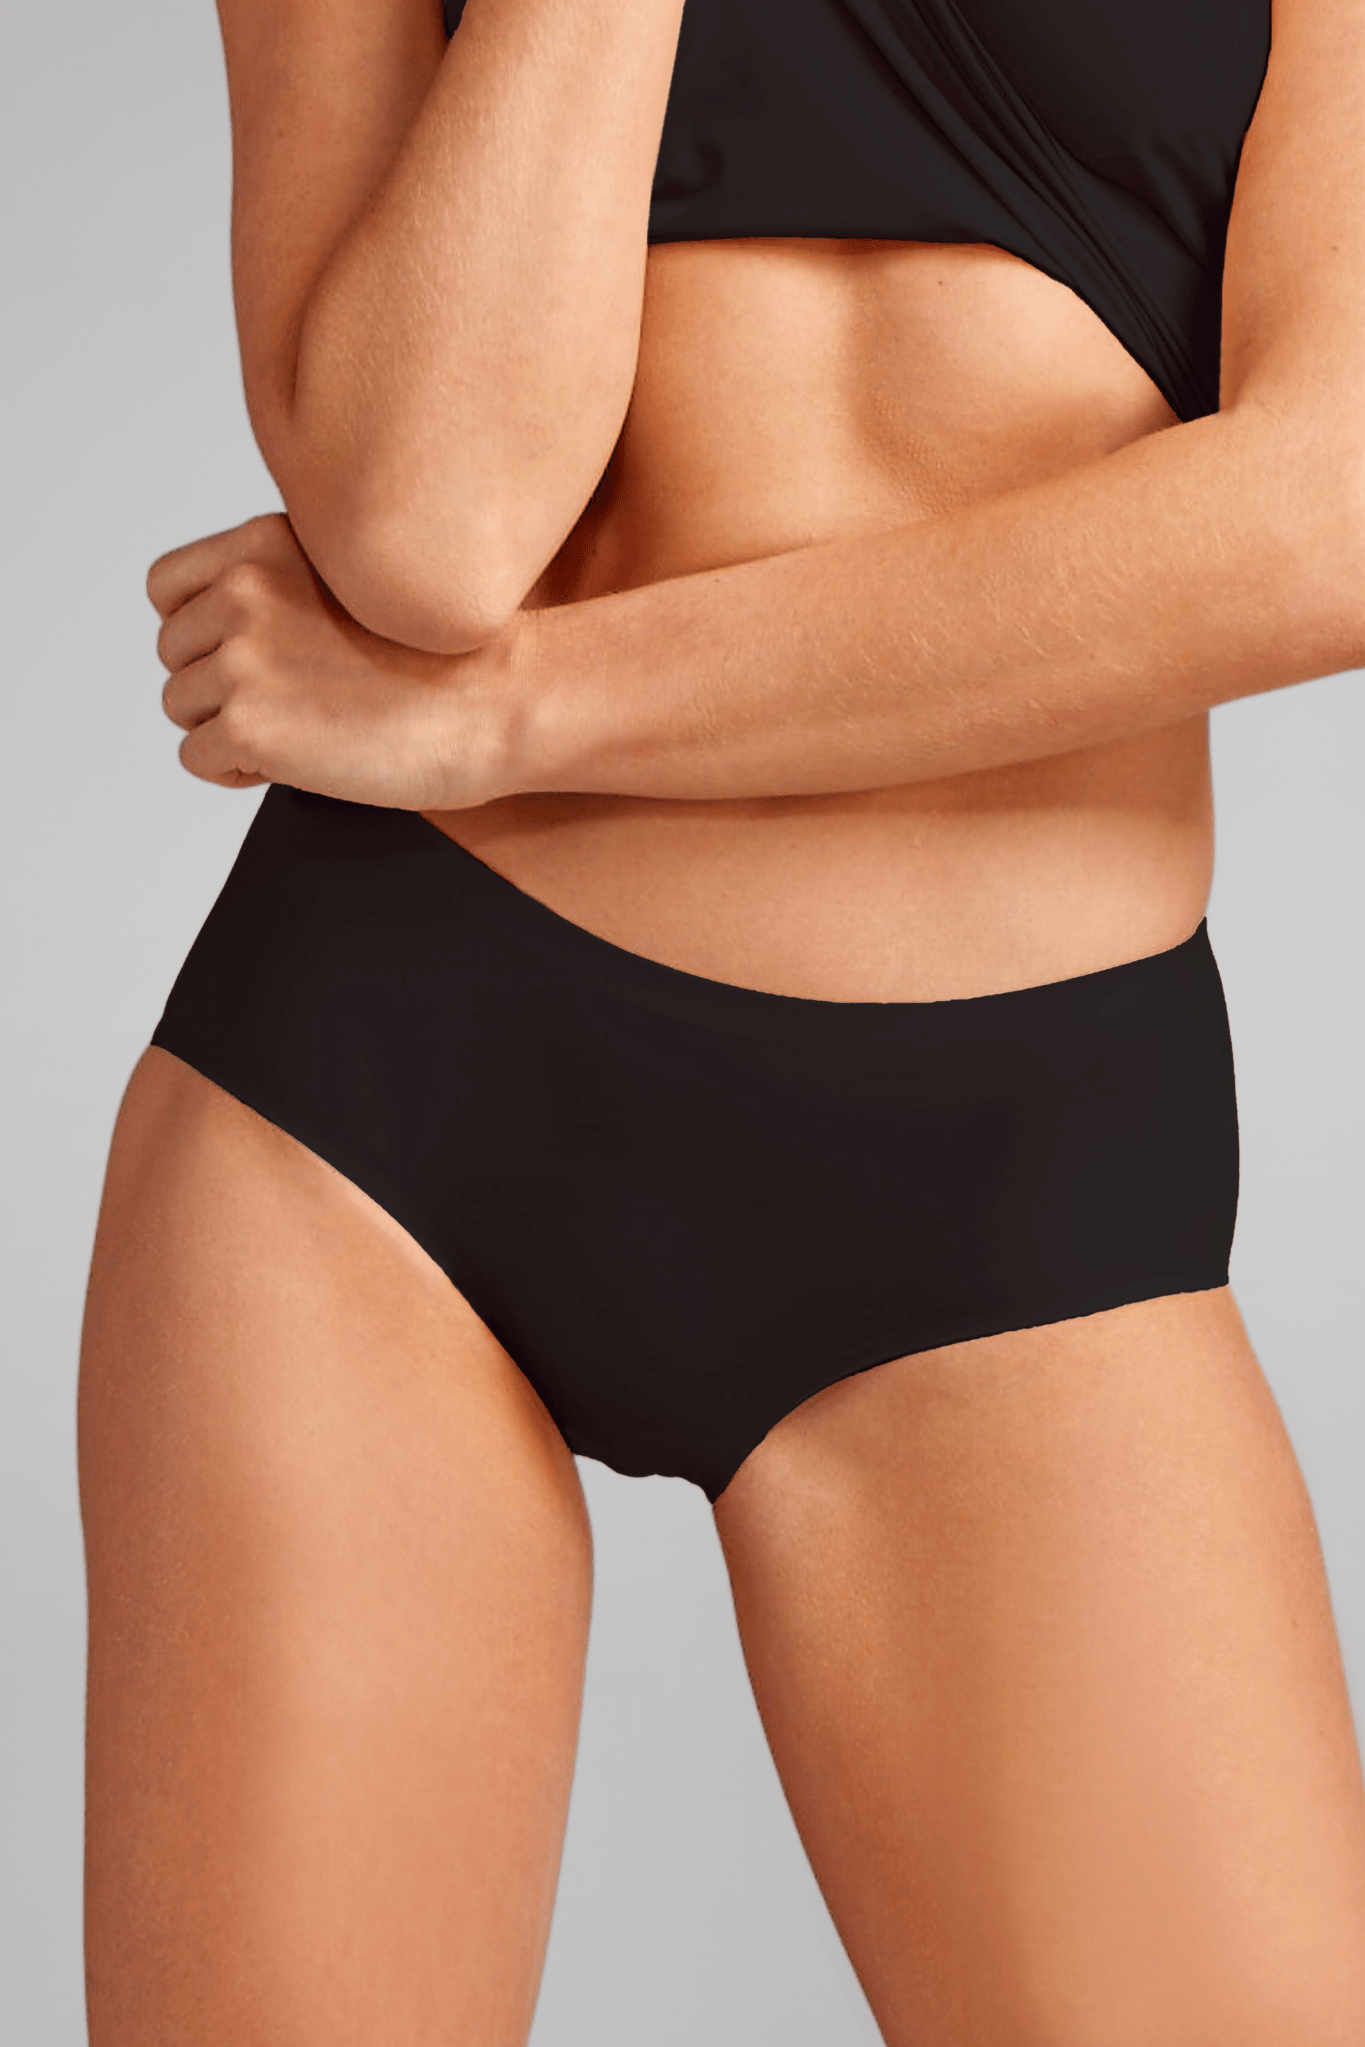 COSOMALL 6 Pack Women's Invisible Seamless Bikini Underwear Half Back  Coverage Panties (US XS, 6 Pack Seamless) at  Women's Clothing store